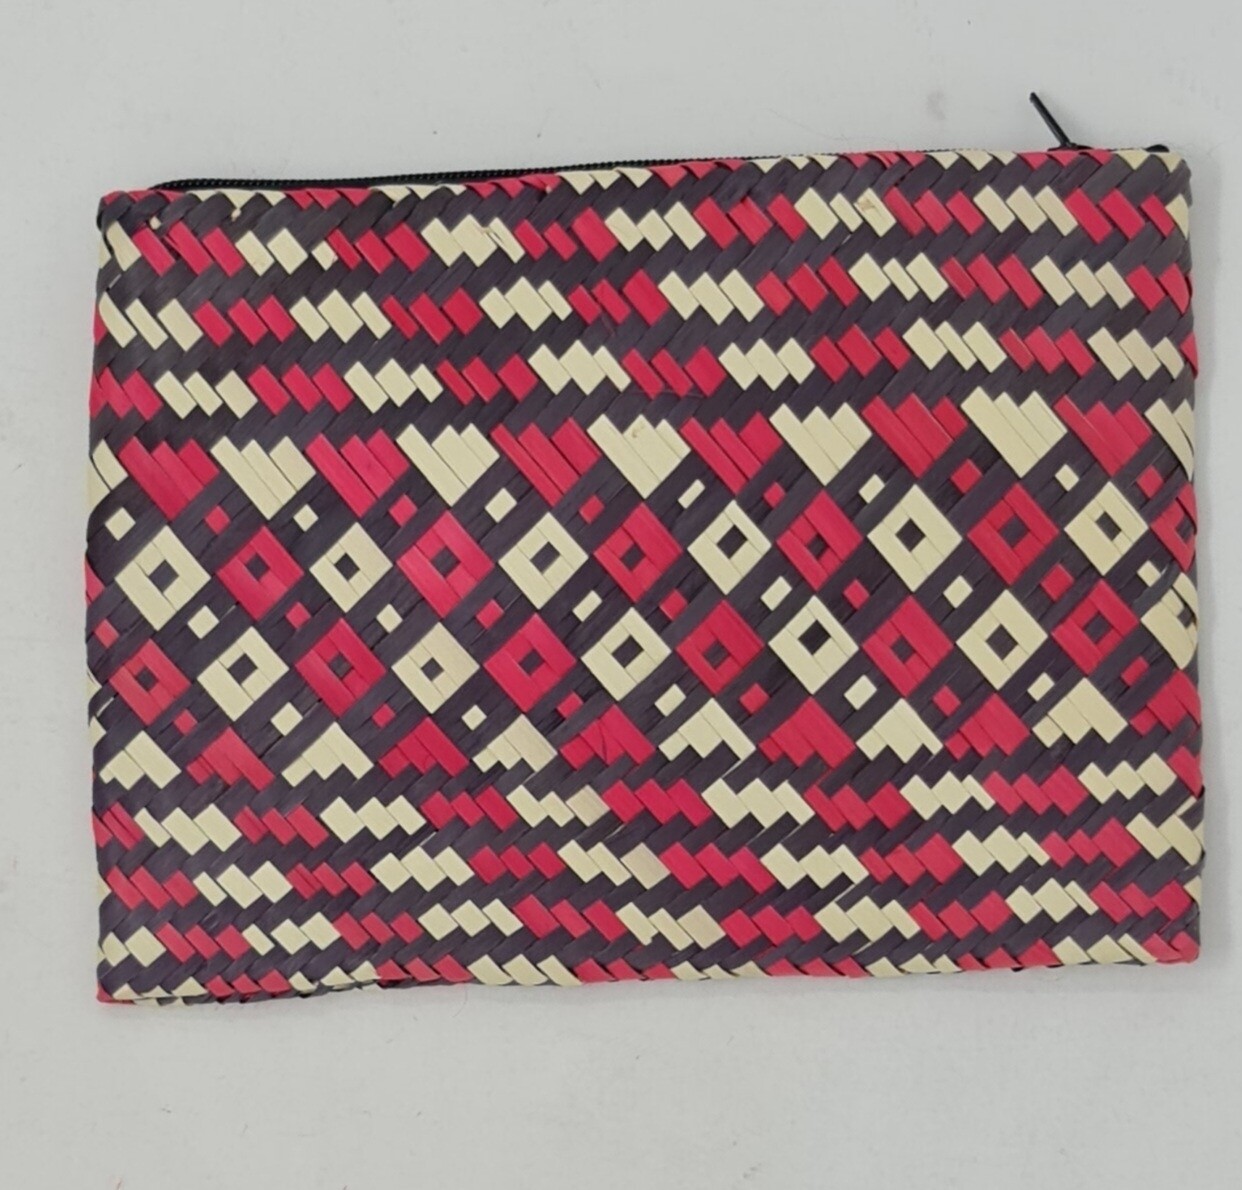 Hand Woven Cosmetic/Makeup Bag 13cm x 17cm - Red mix